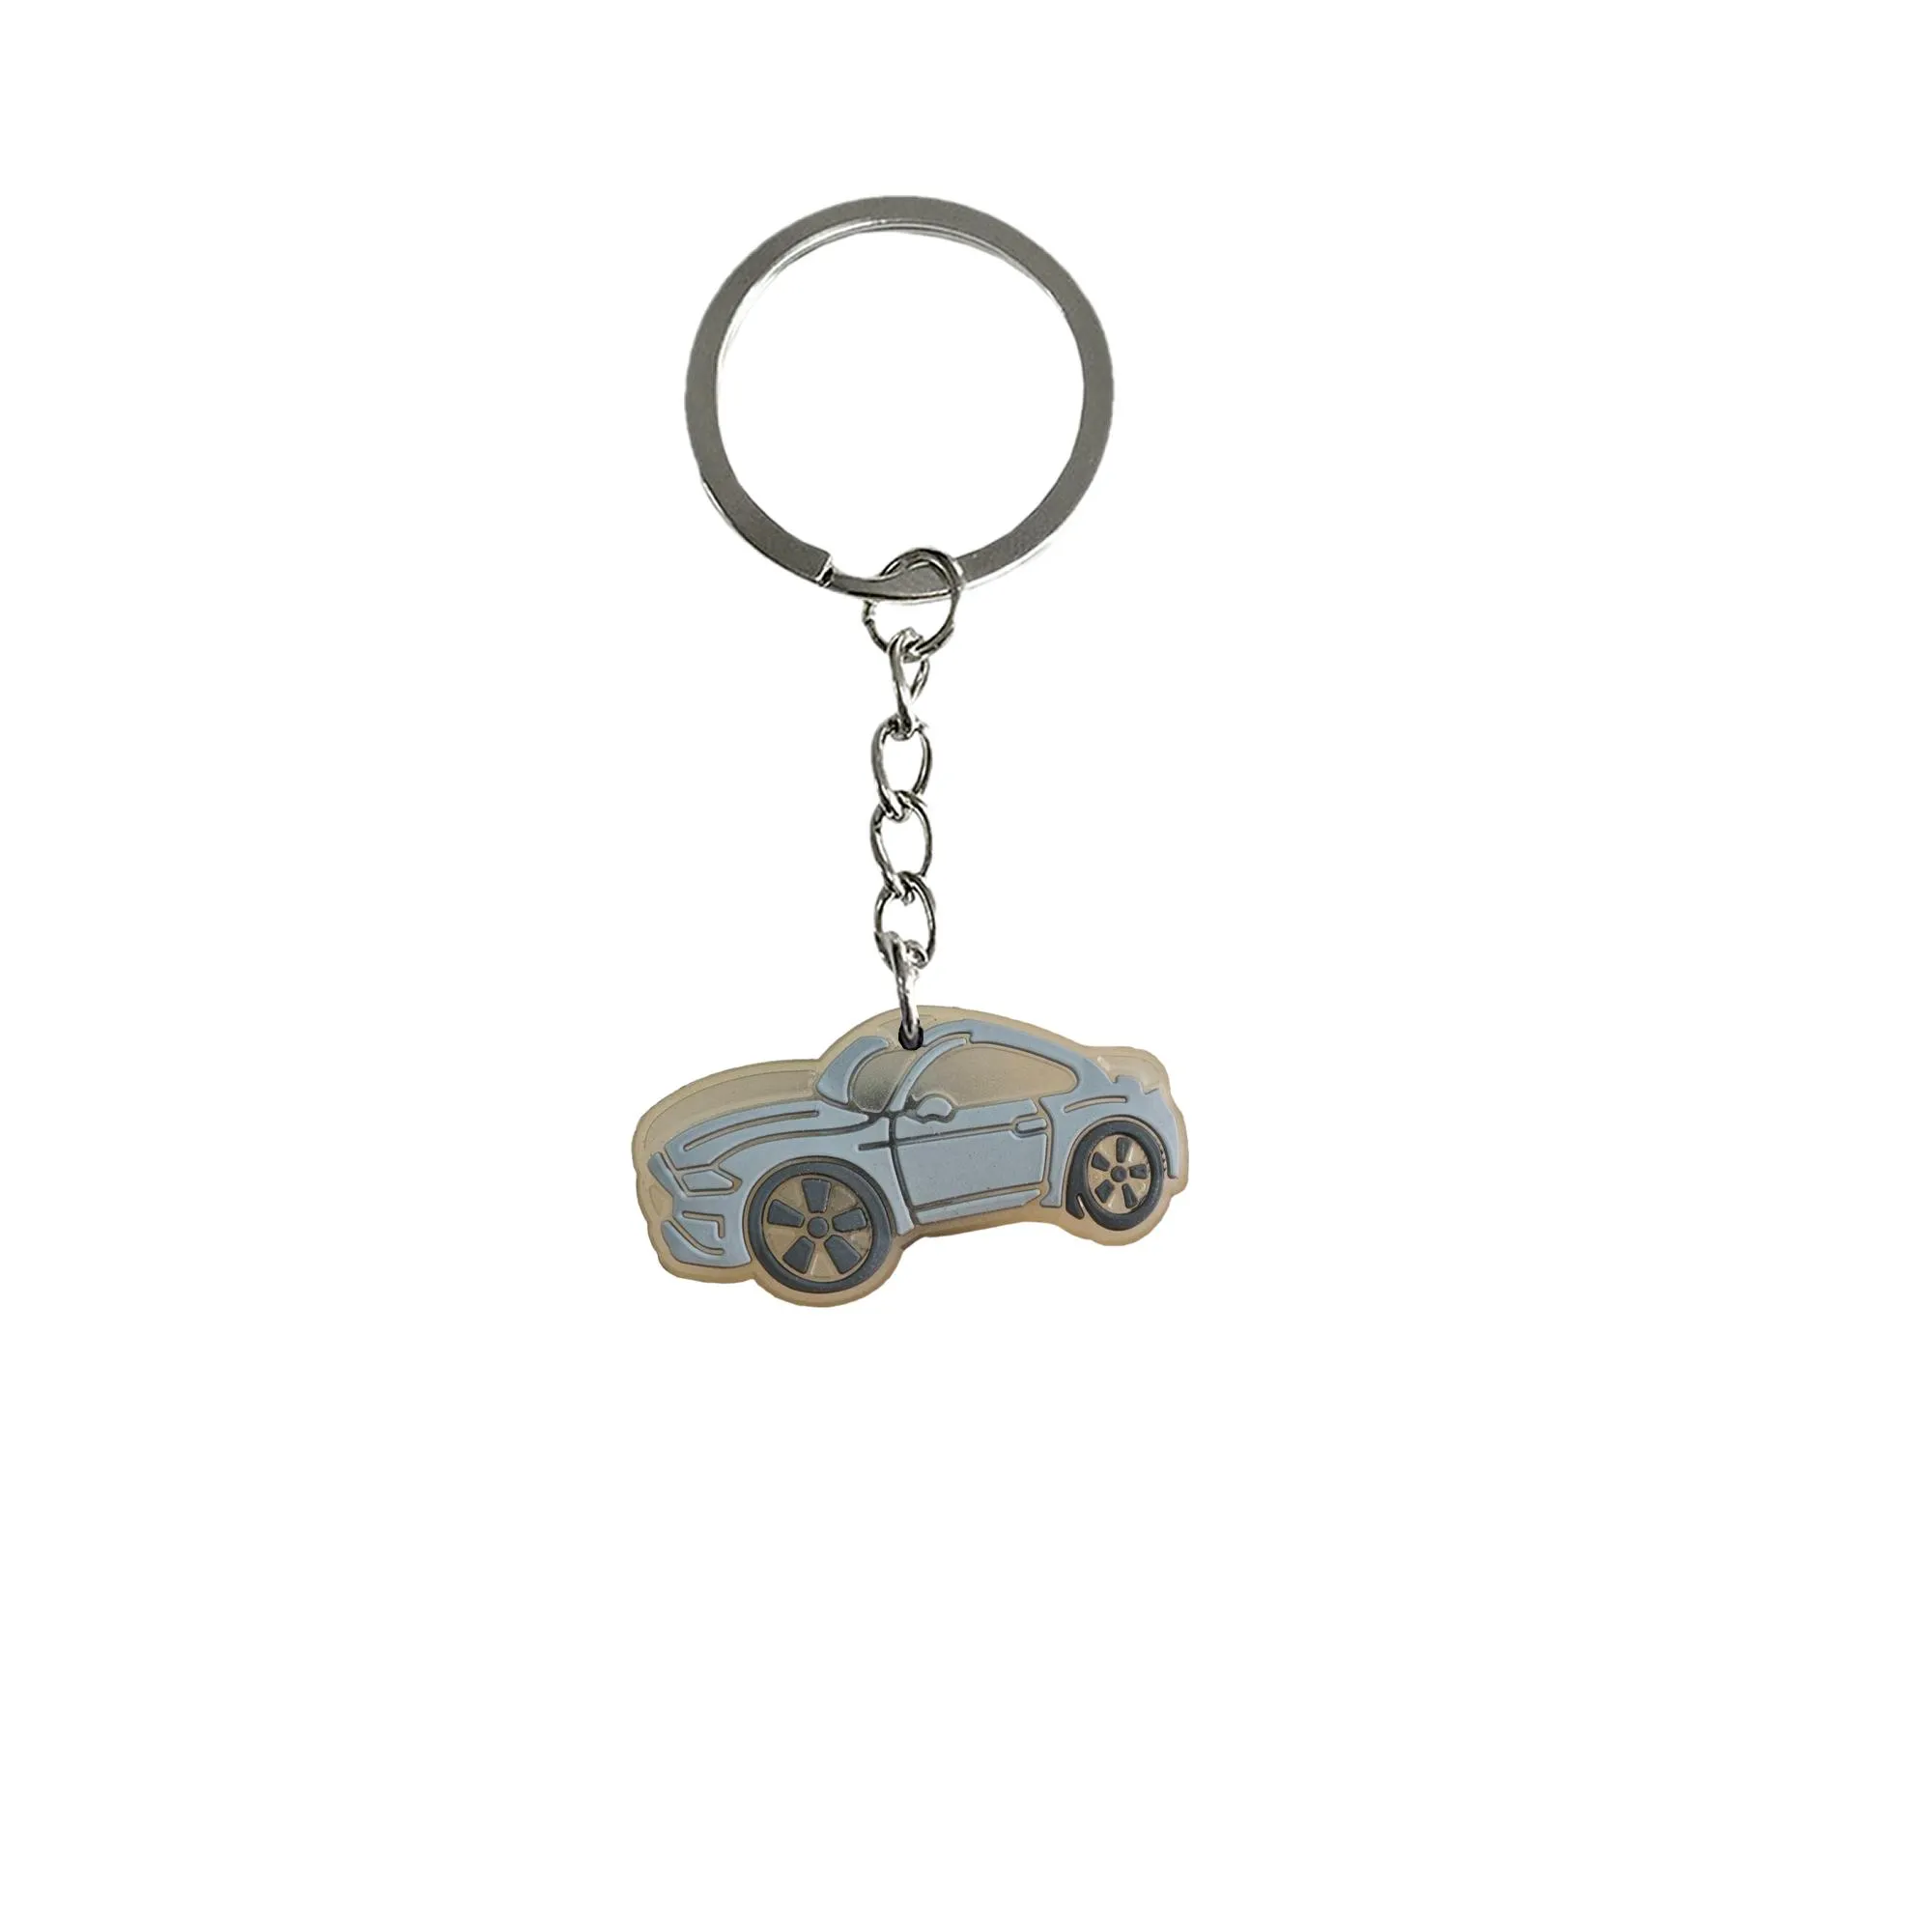 fluorescent cars 19 keychain keyring for backpack car charms pendants accessories kids birthday party favors keyrings bags suitable schoolbag couple key chains women cute silicone chain adult gift ring girls